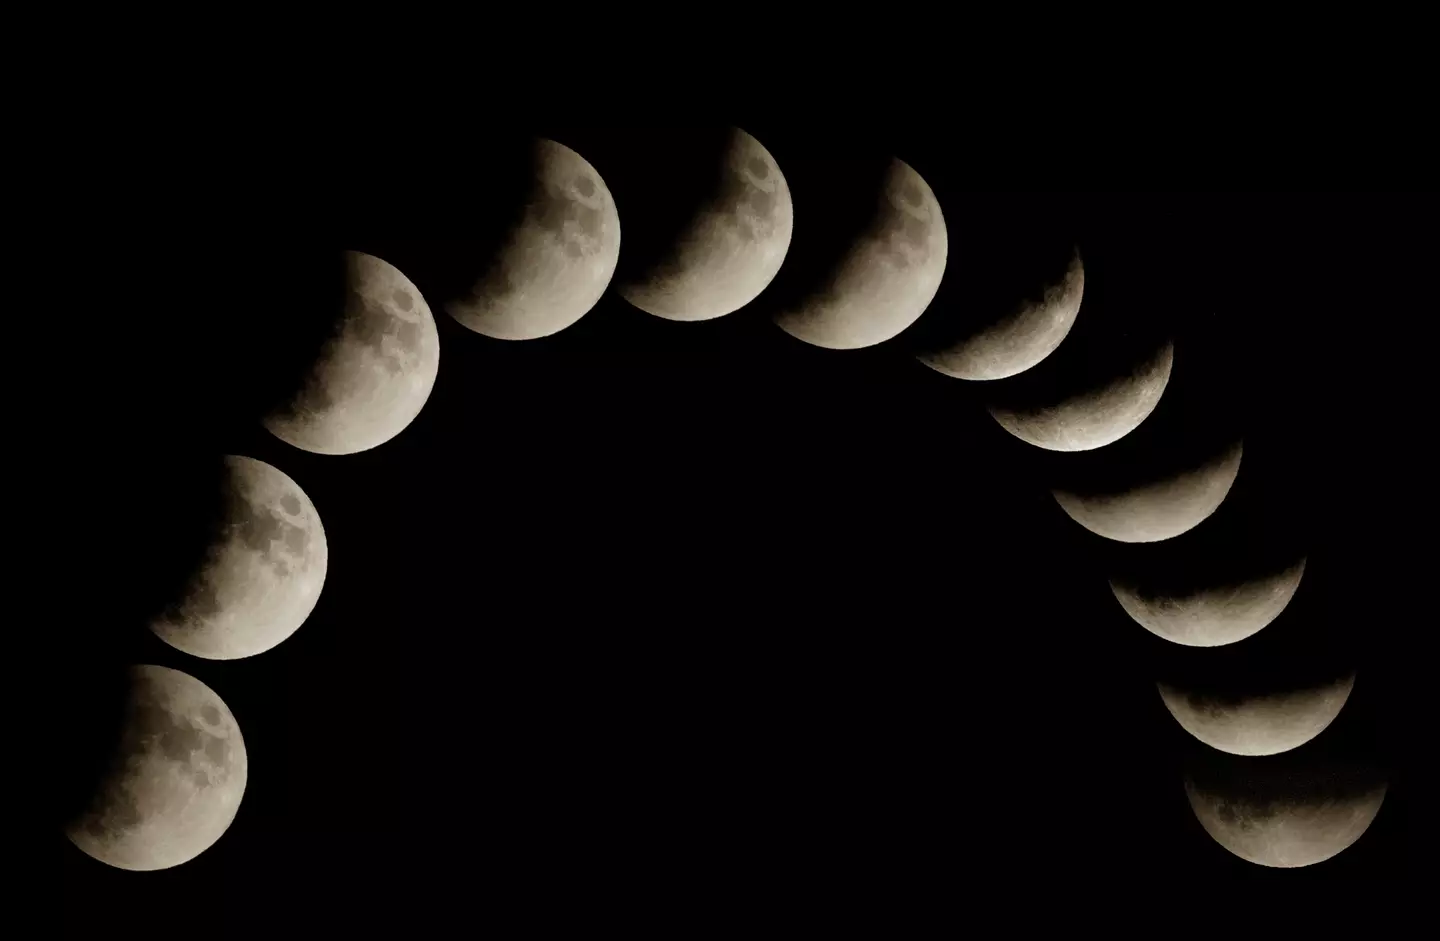 A partial lunar eclipse will take place tonight.